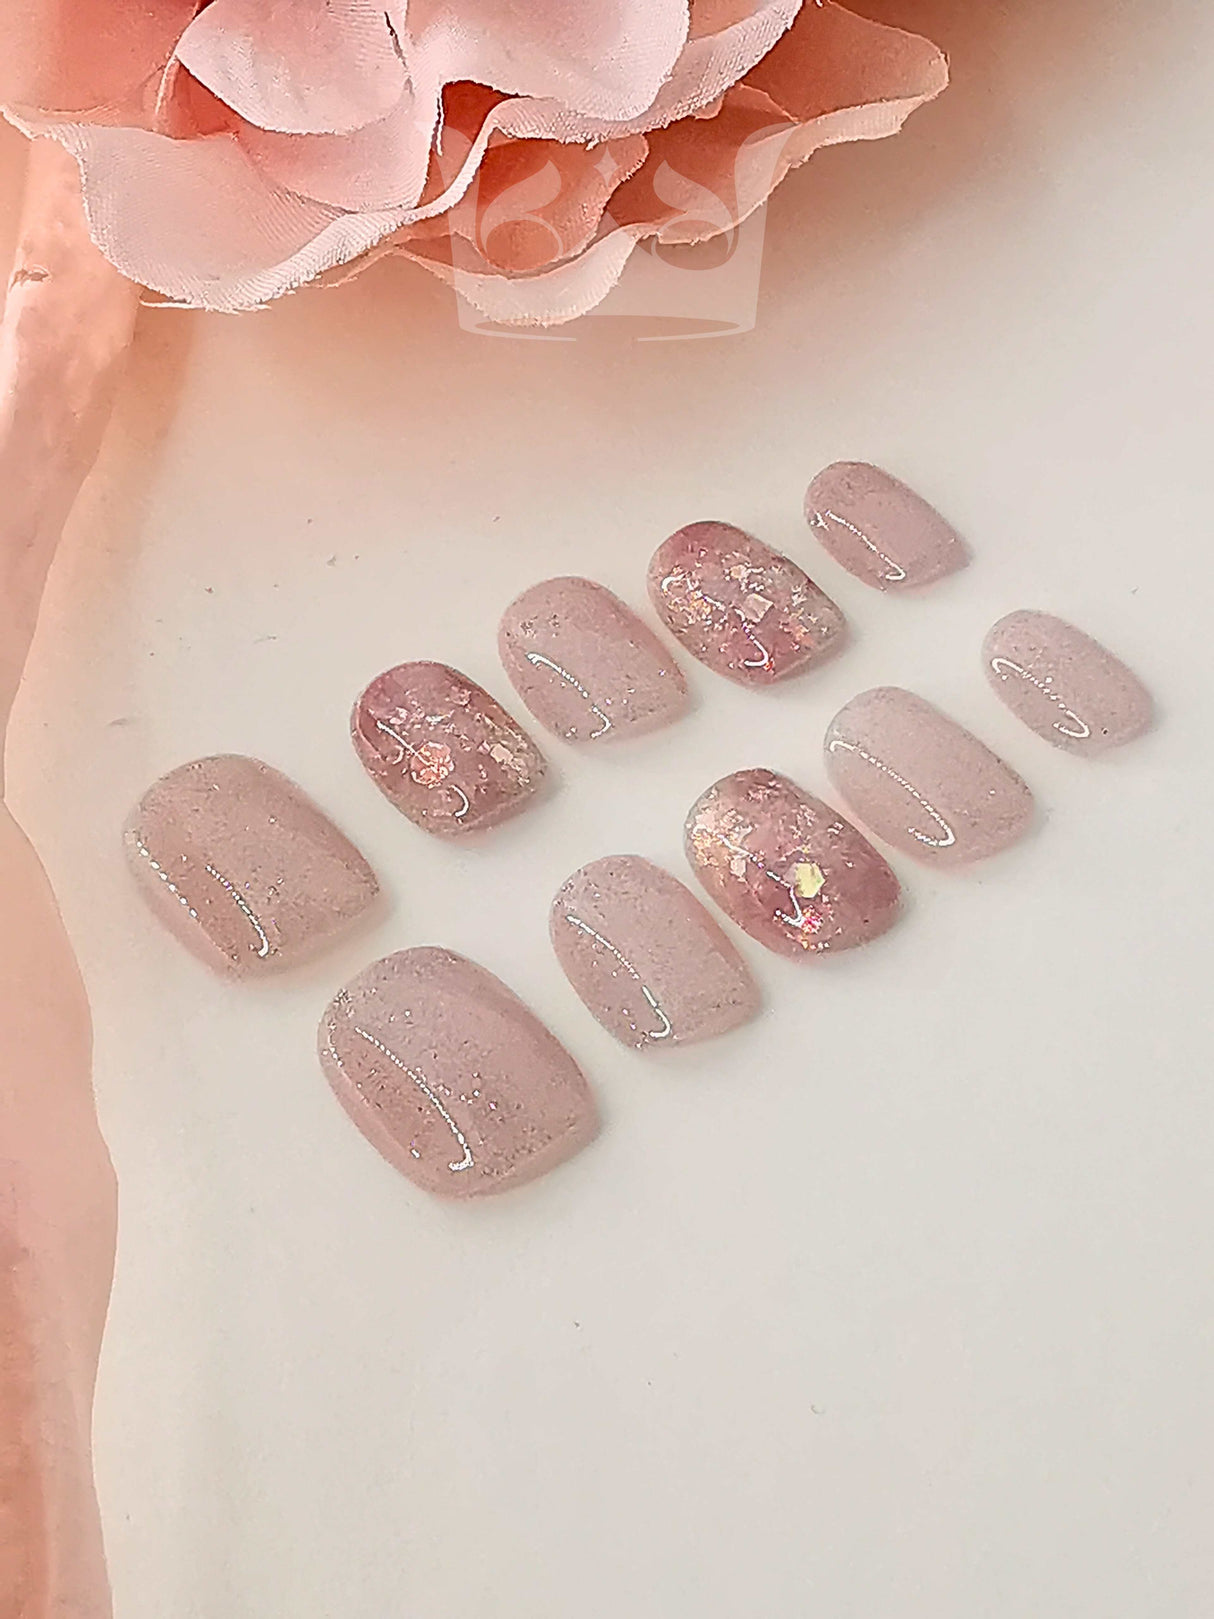 These press-on nails are for fashion-forward individuals who want to make a statement. They feature a fancy design with metallic accents and would add a touch of luxury